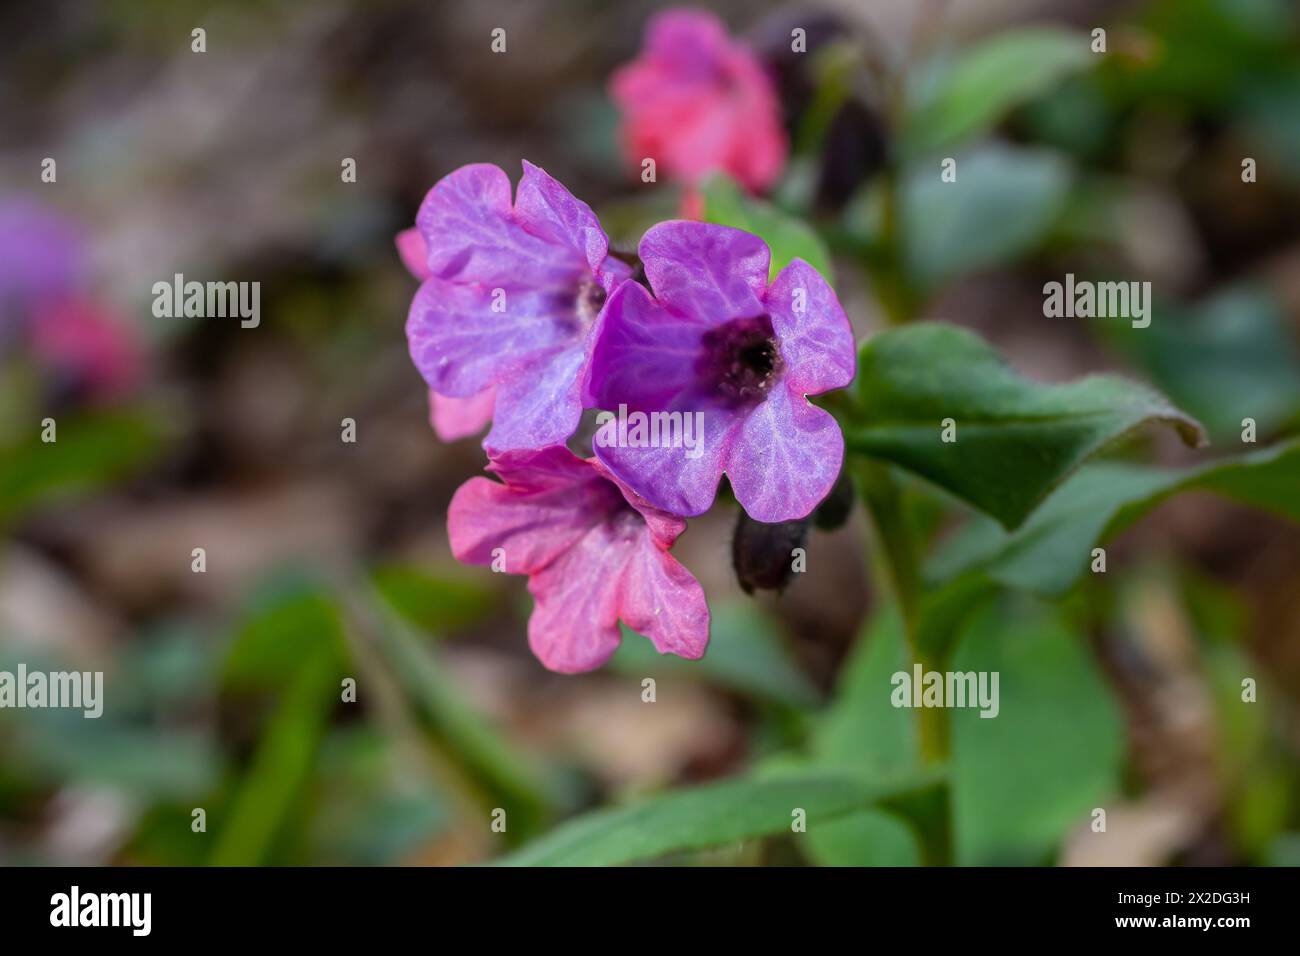 Vivid and bright pulmonaria flowers on green leaves background close up. Stock Photo